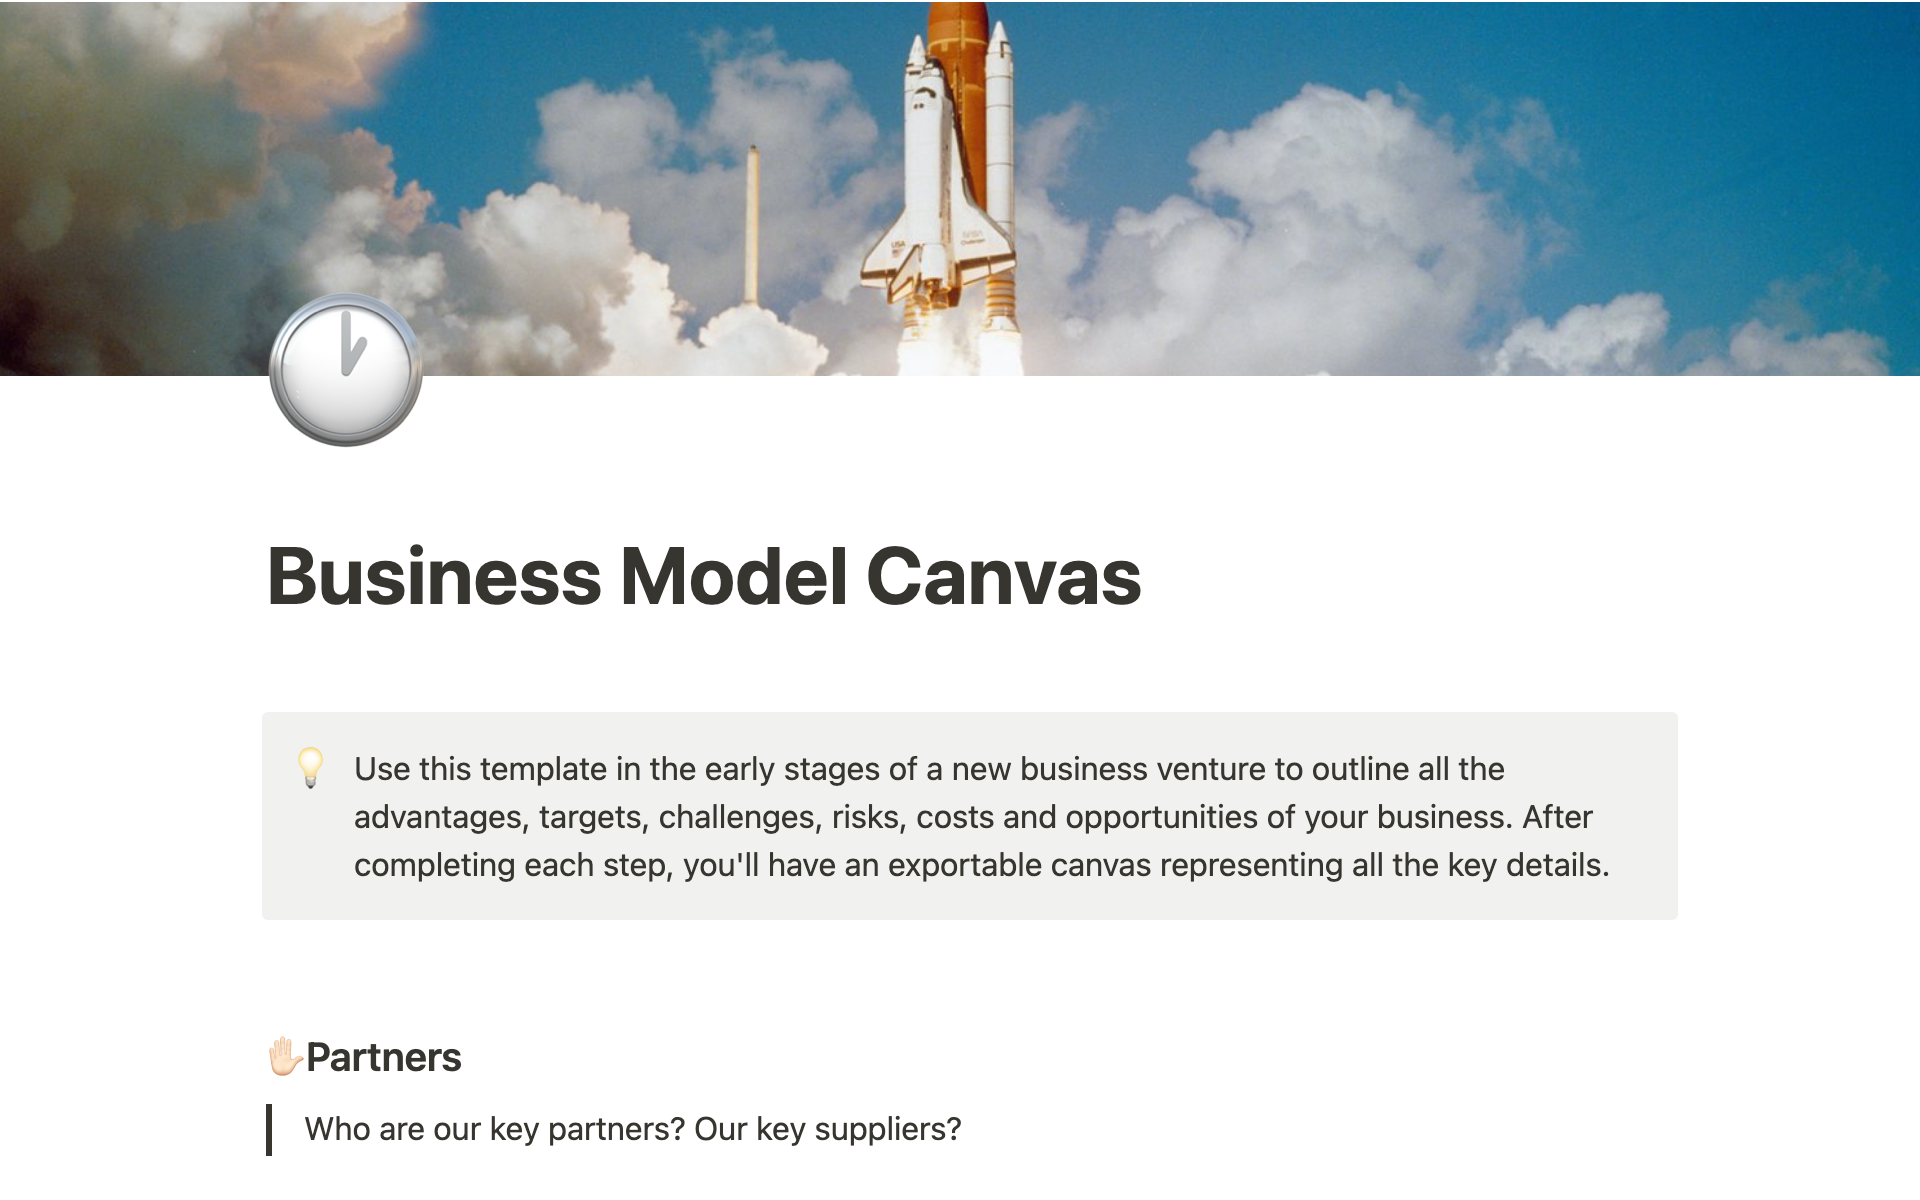 Using the Business Model Canvas to outline the advantages, targets, risks, costs and opportunities of  your business.